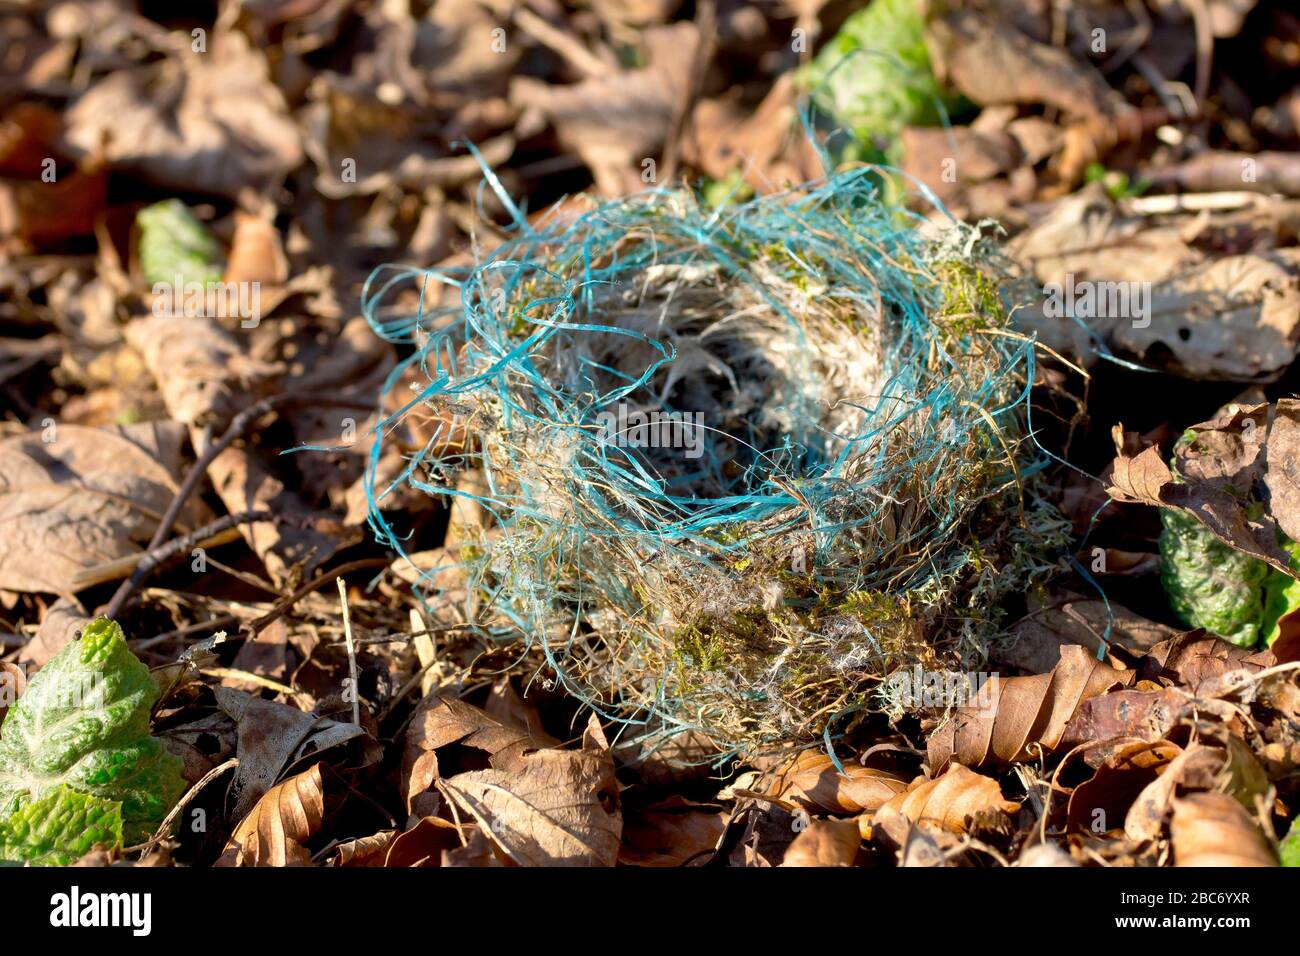 A small bird's nest, fallen from a tree and resting on the leaf litter. Interestingly it includes strands of blue plastic in it's construction. Stock Photo